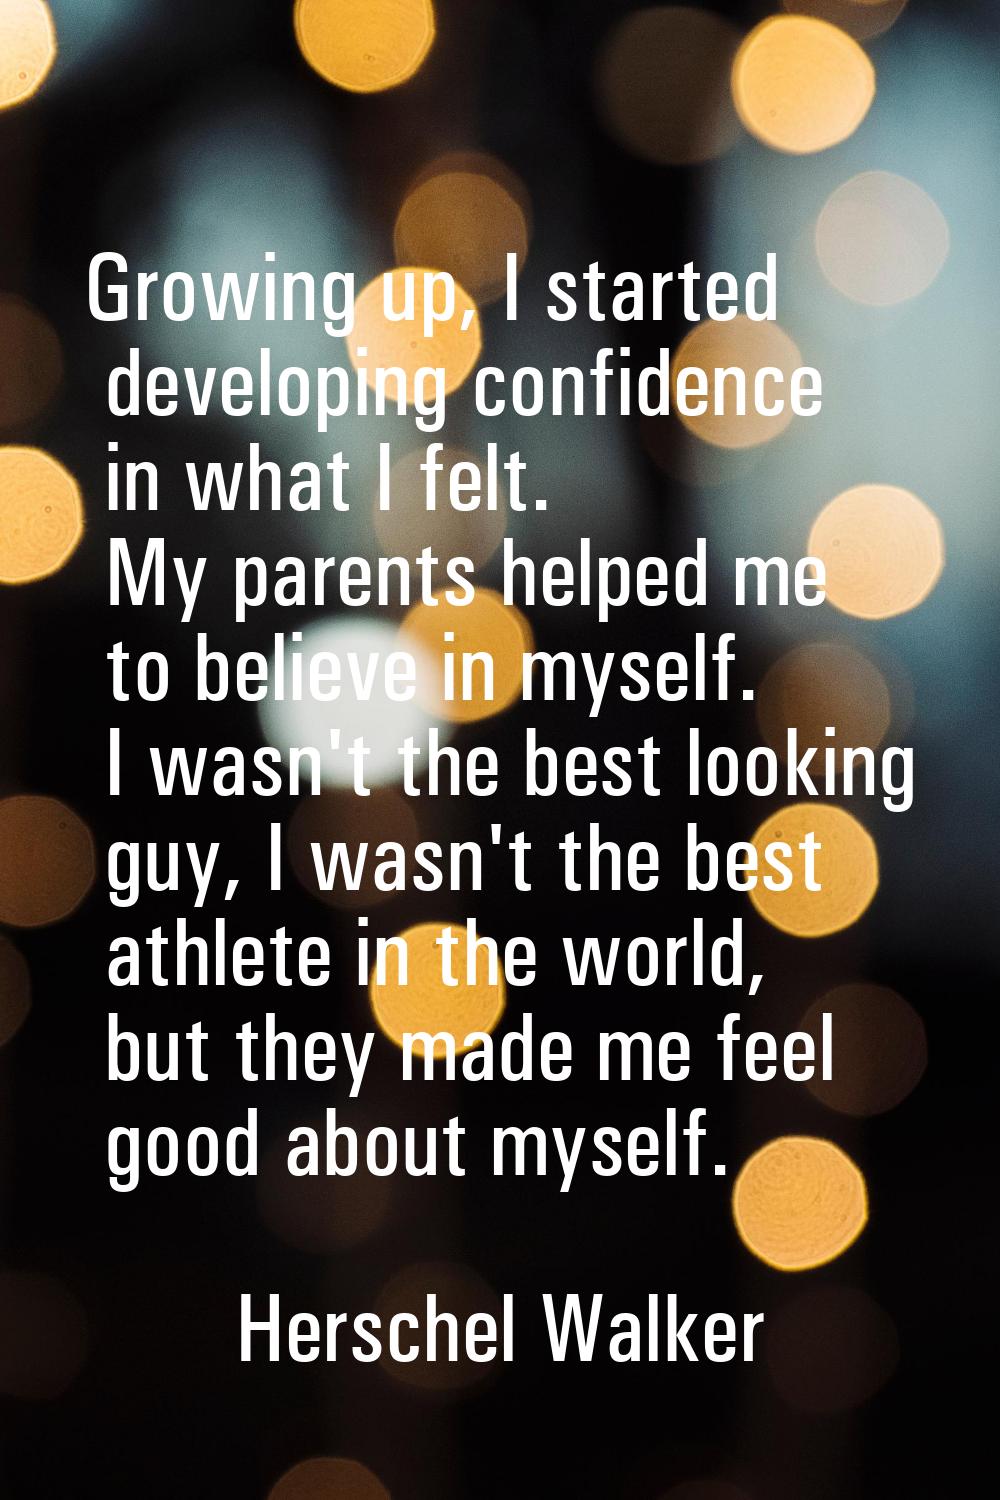 Growing up, I started developing confidence in what I felt. My parents helped me to believe in myse